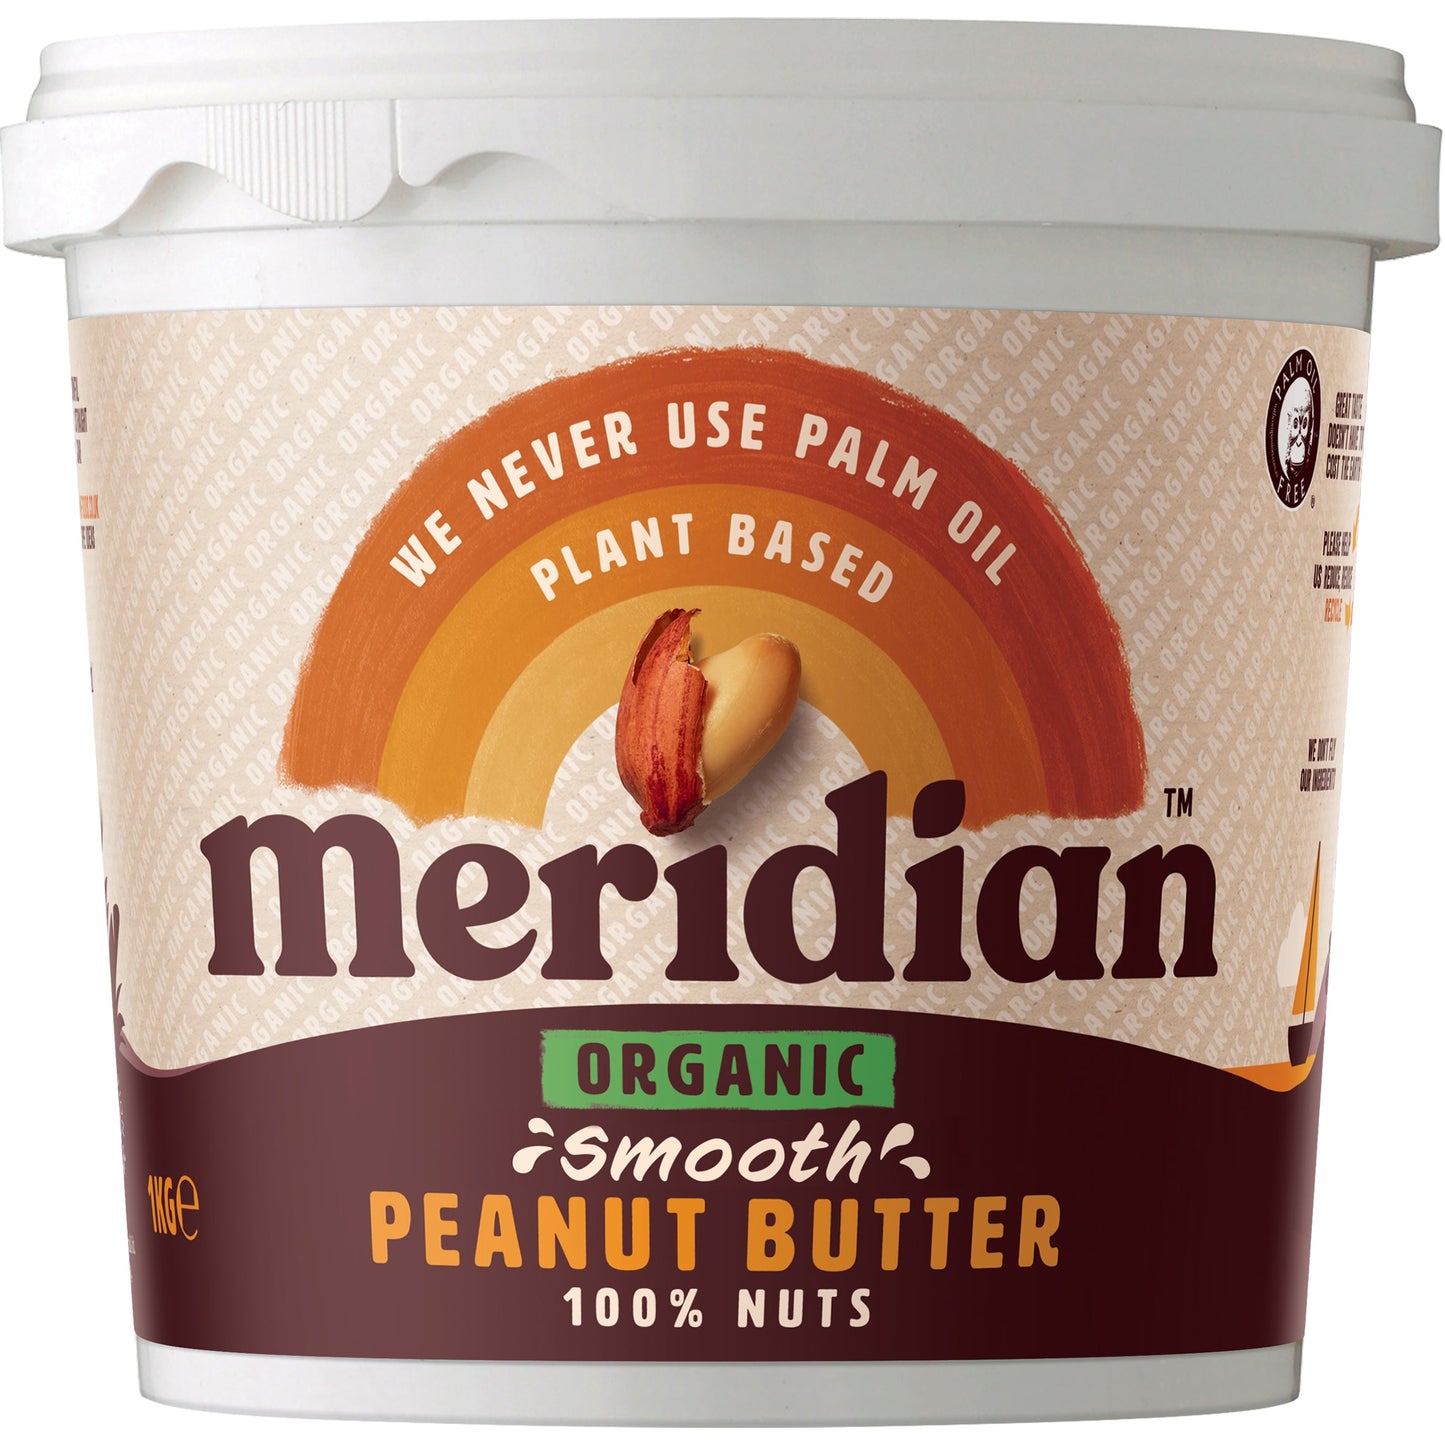 Peanut Butter Smooth 100% Nuts (Org) 30116A